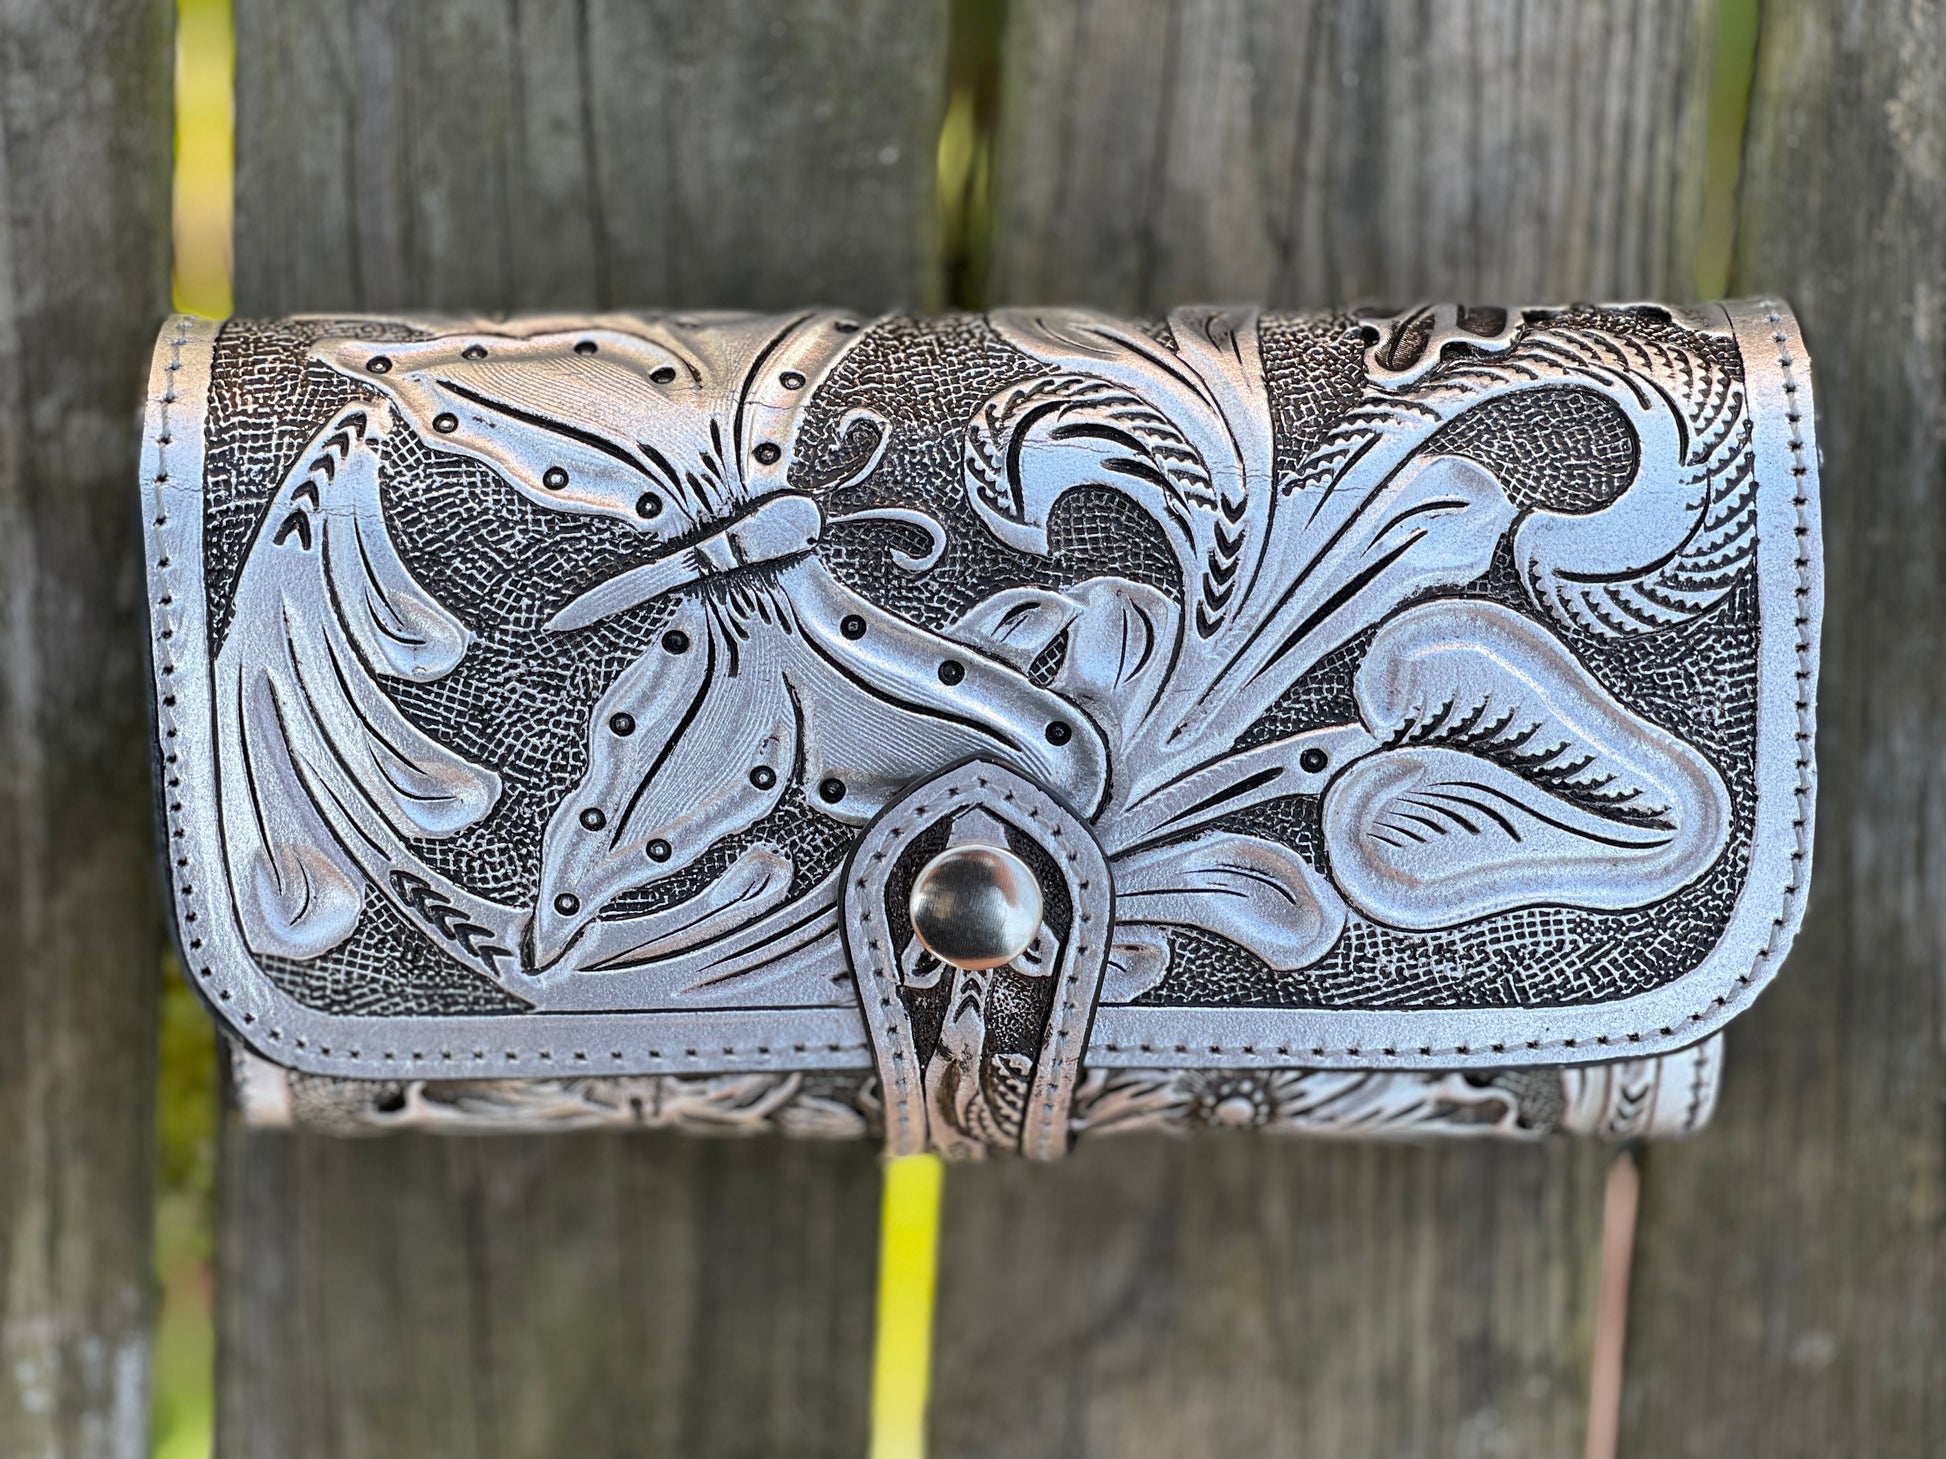 Hand Tooled Leather Wallet, "WALLET BOTON" by ALLE - ALLE Handbags